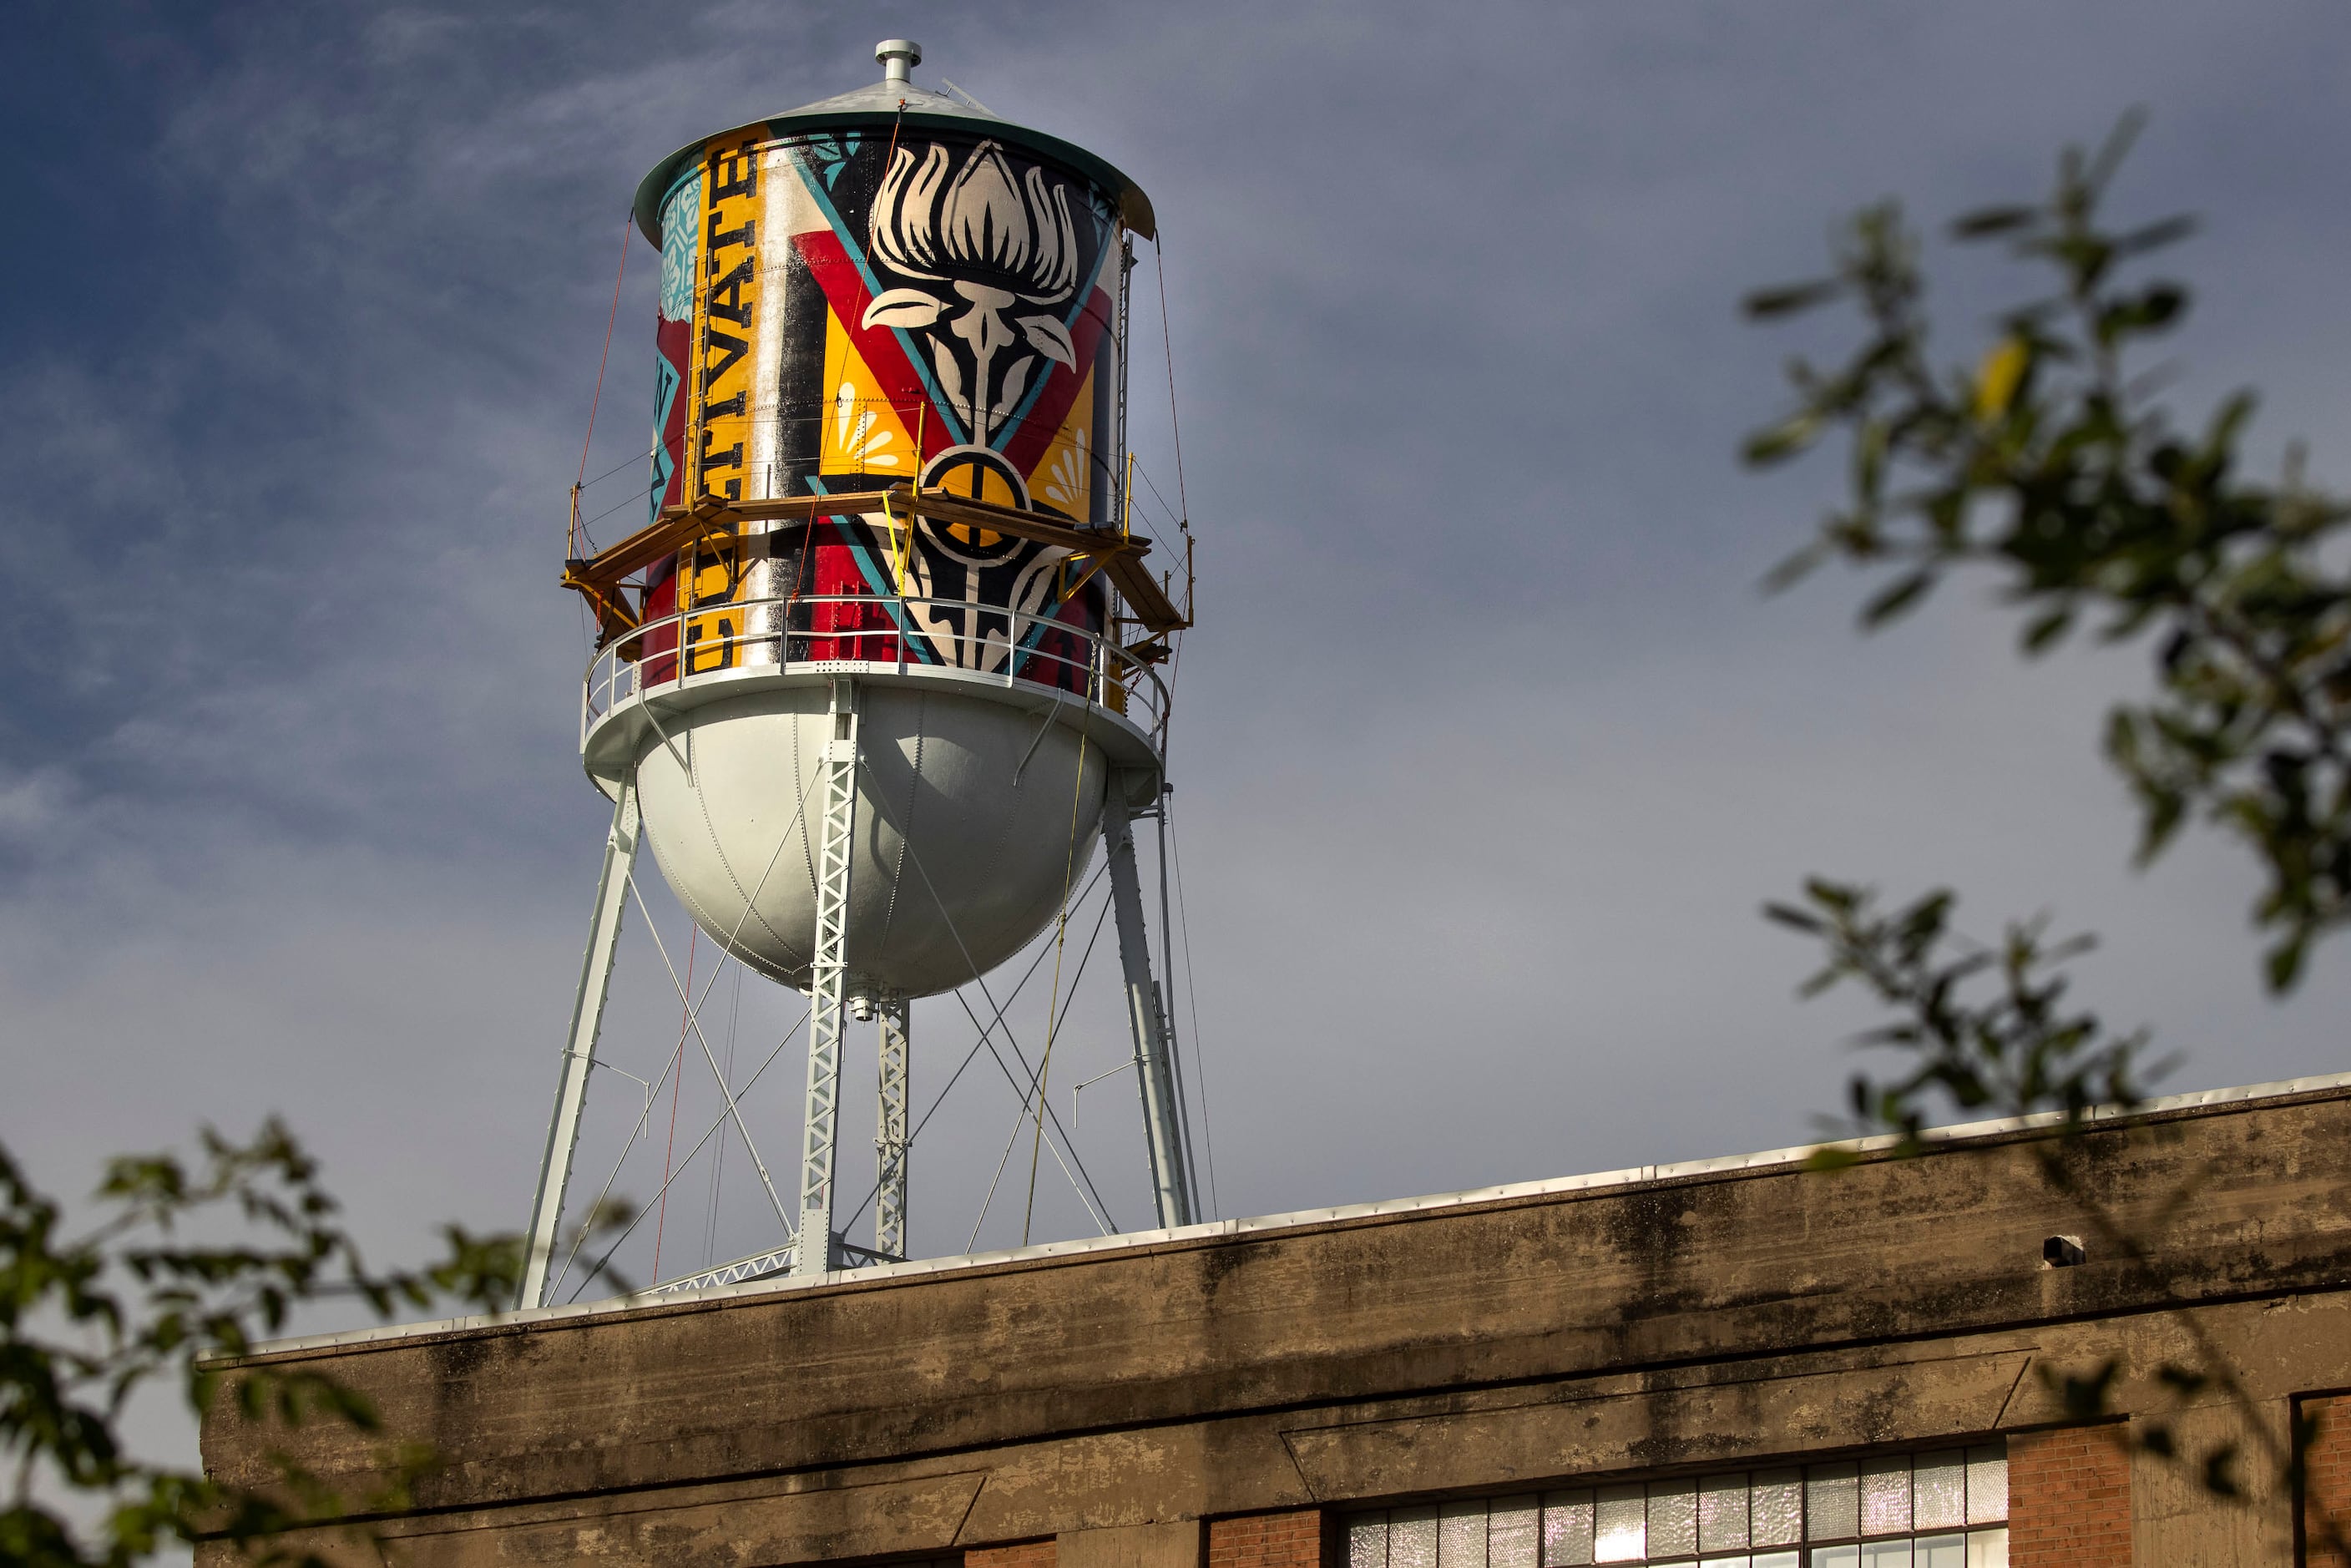 A new mural by Shepard Fairey appears on the side of a water tower by the Continental Gin...